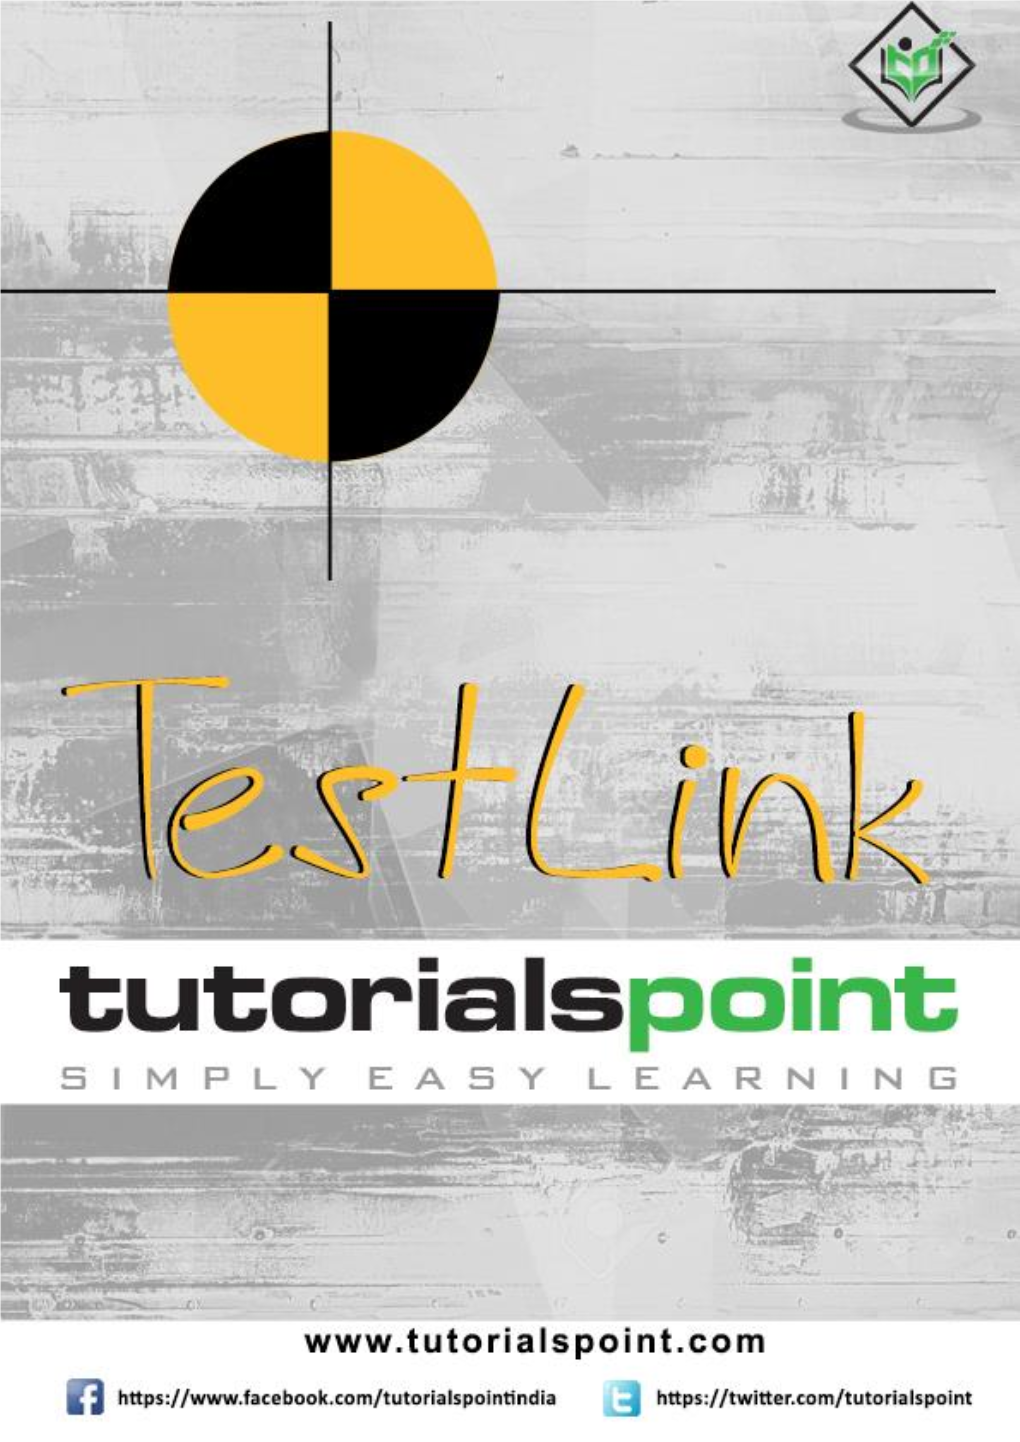 Testlink Is a Test Management Tool Used to Track and Maintain the Records of All STLC Phases Starting from the Test Plan to the Report Creation Phase